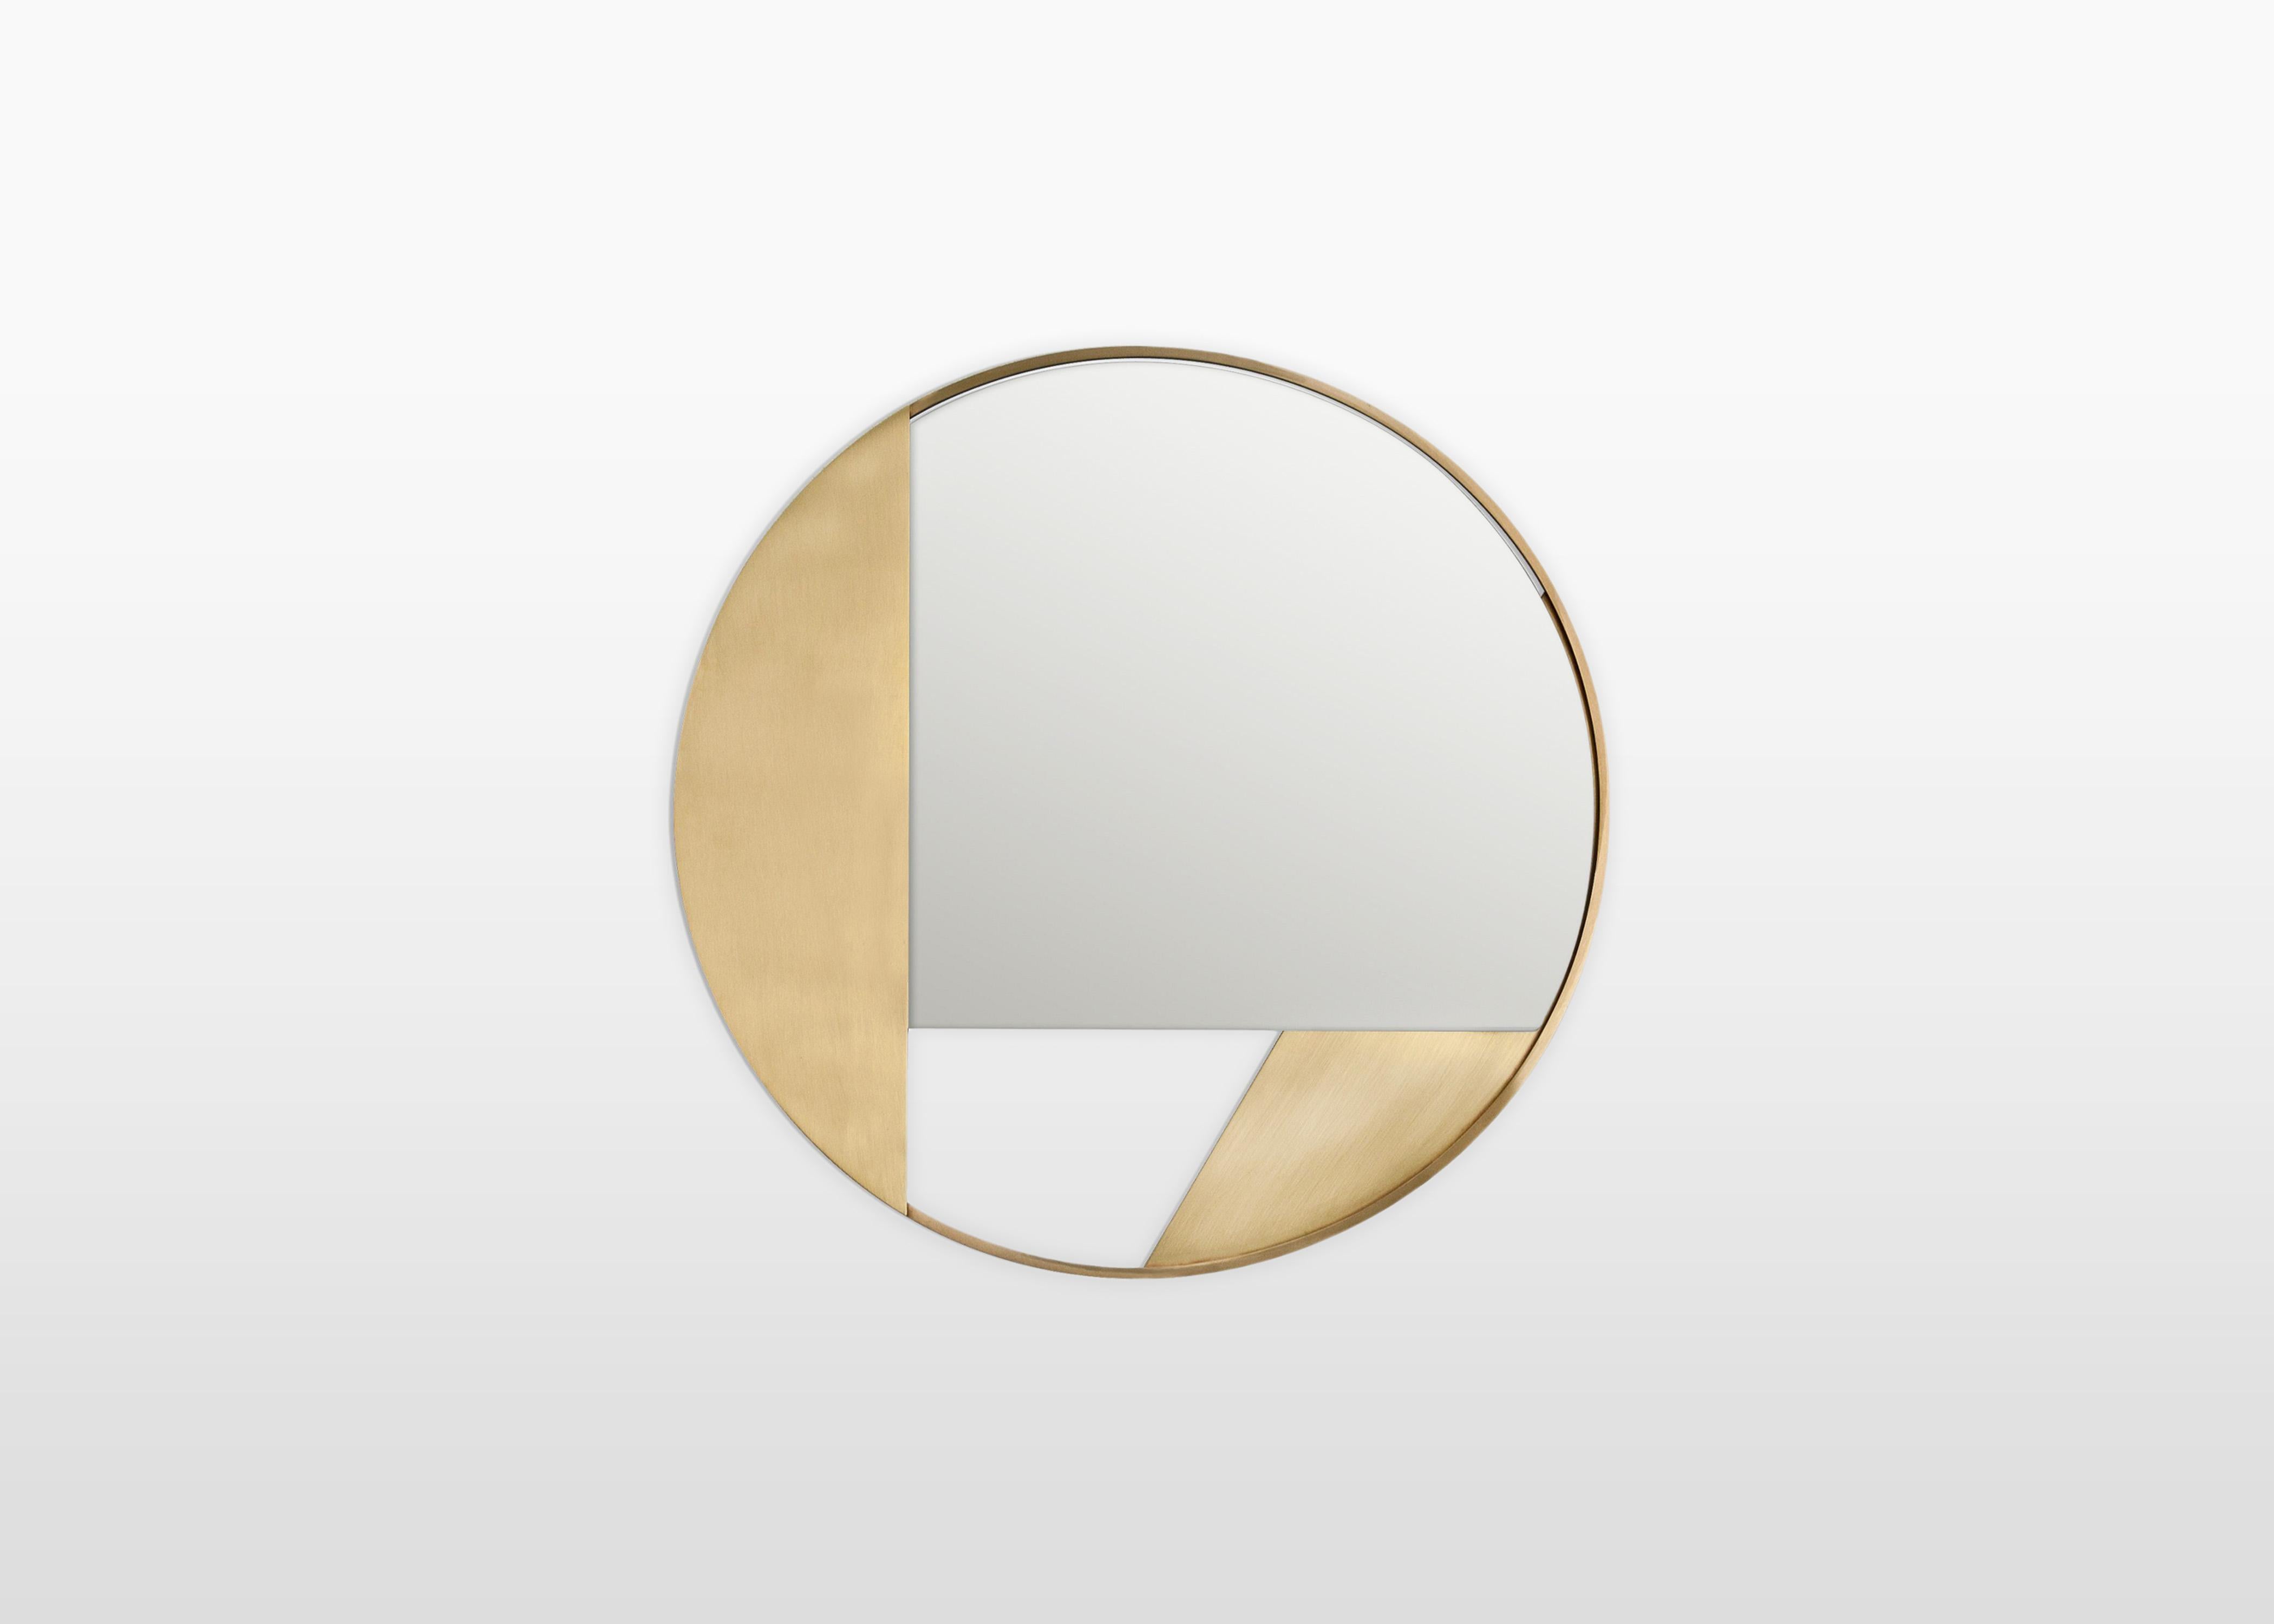 Edition mirror by Edizione Limitata
Limited edition of 1000 pieces. Signed and numbered.
Designers: Simone Fanciullacci
Dimensions: D 4 x Ø 55 cm.
Materials: brushed brass, mirror

Edizione Limitata, that is to say “Limited Edition”, is a brand